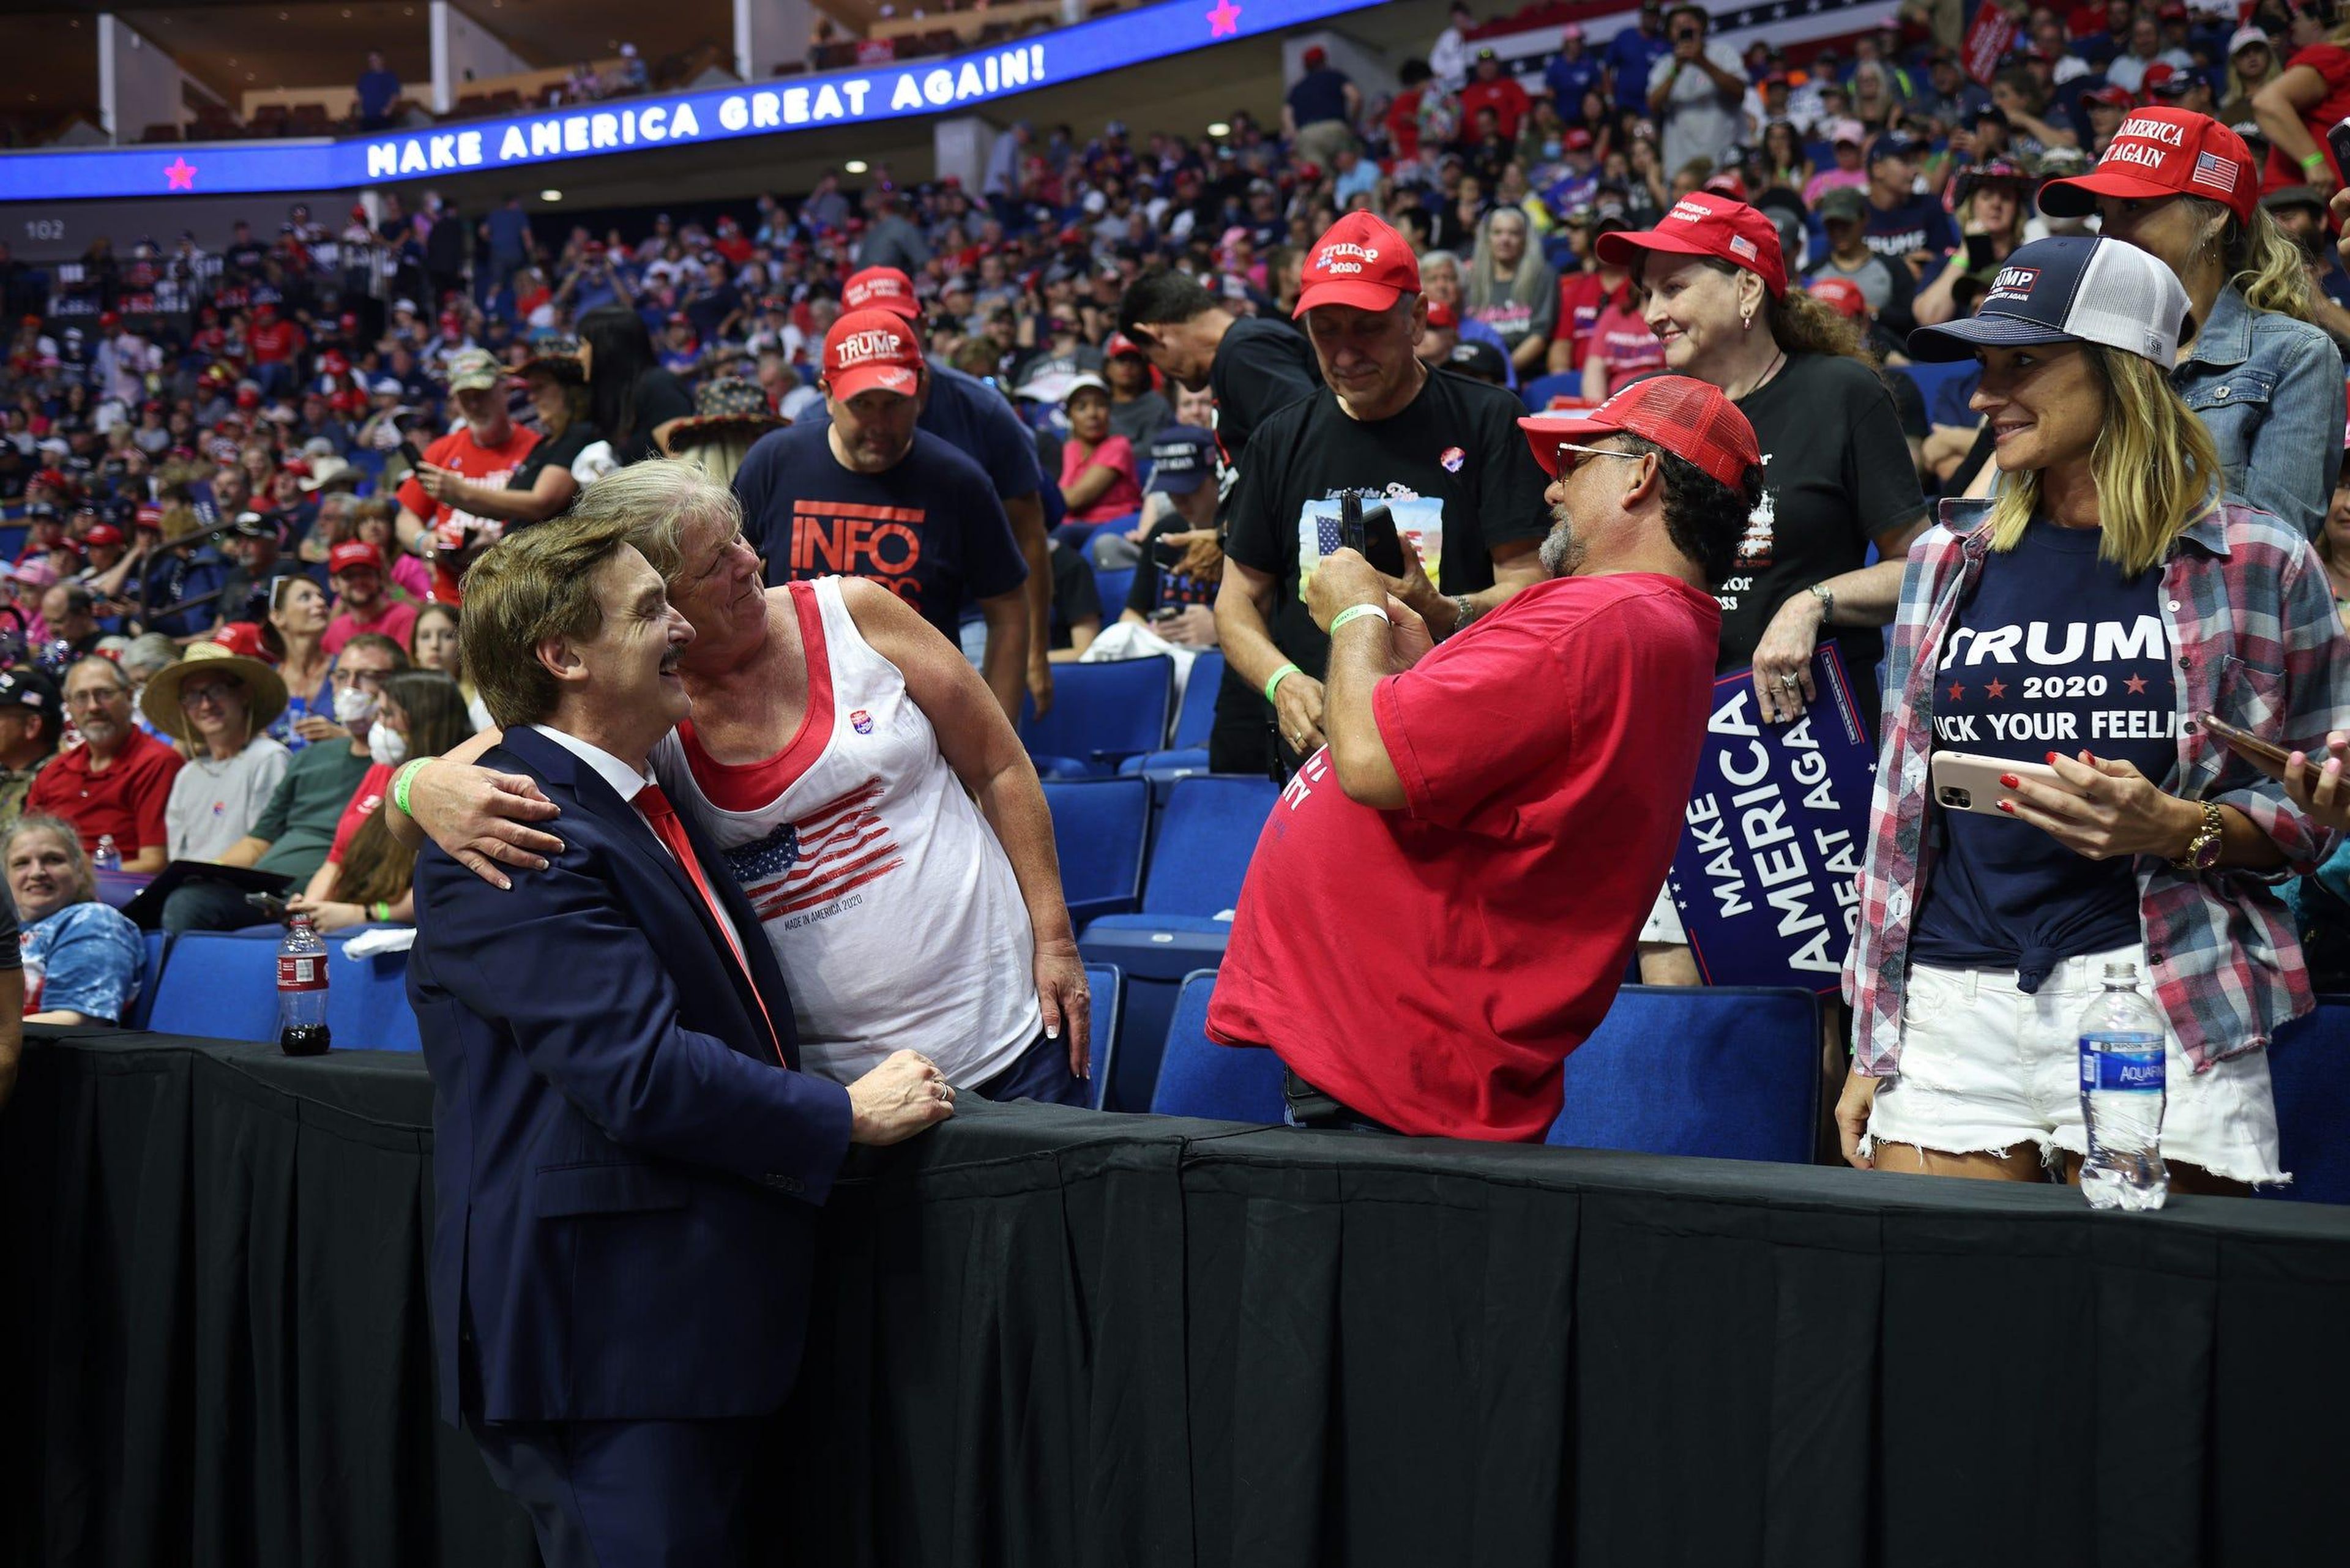 MyPillow founder Michael J. Lindell greets people before the start of a campaign rally for President Trump on June 20, 2020 in Tulsa, Oklahoma.